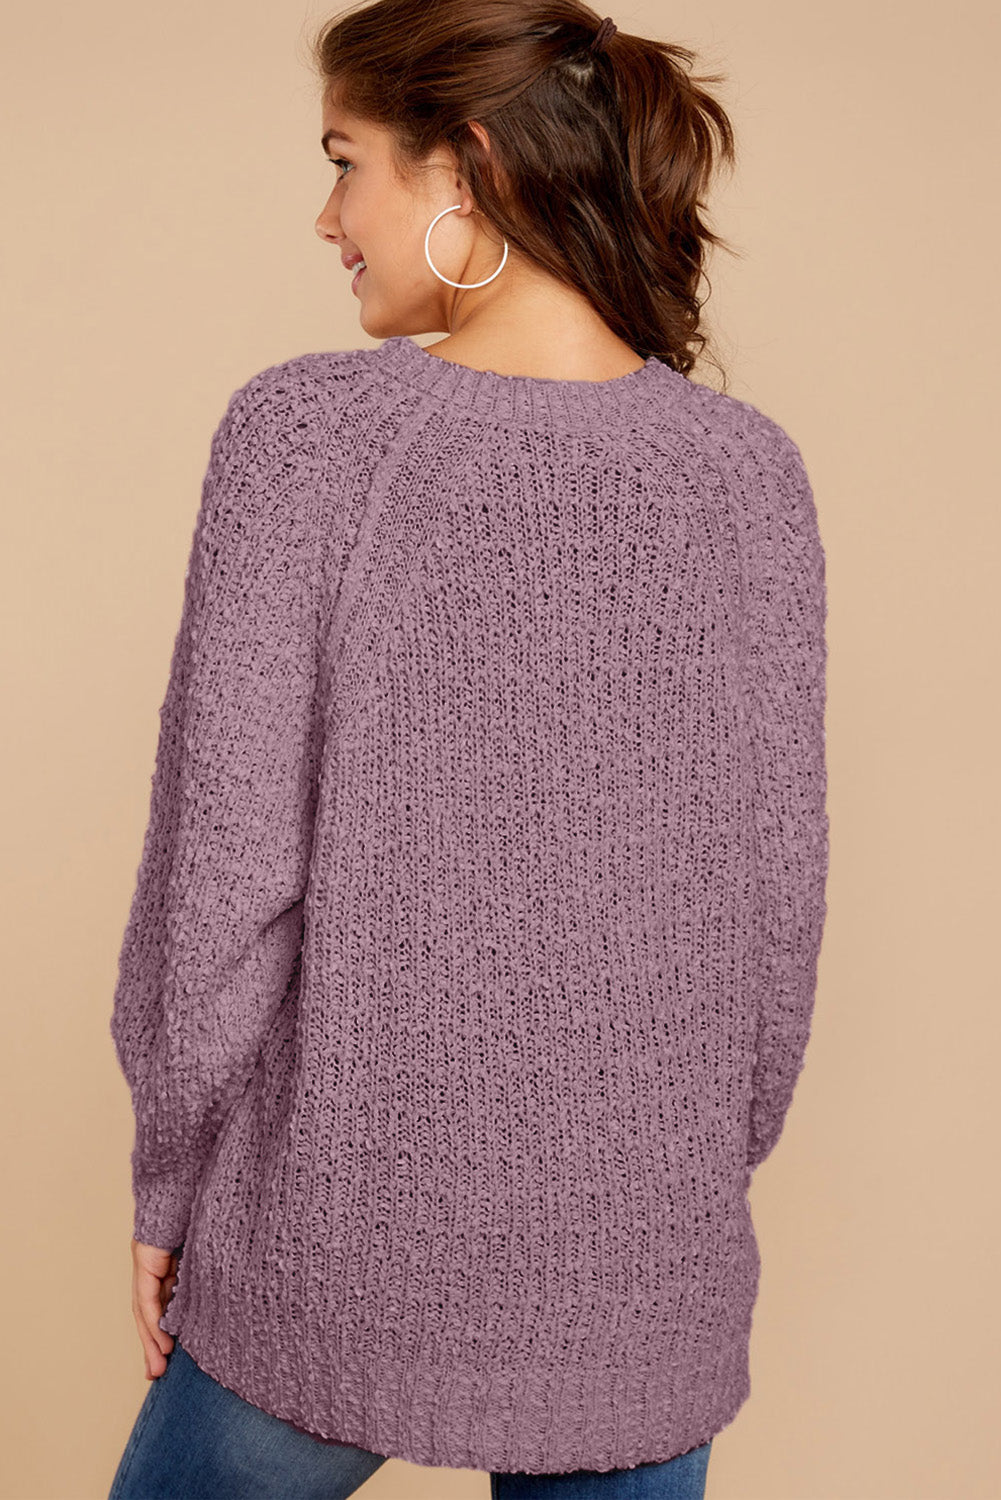 Purple Pink/Khaki/Apricot Chill in The Air Sweater LC270016-8